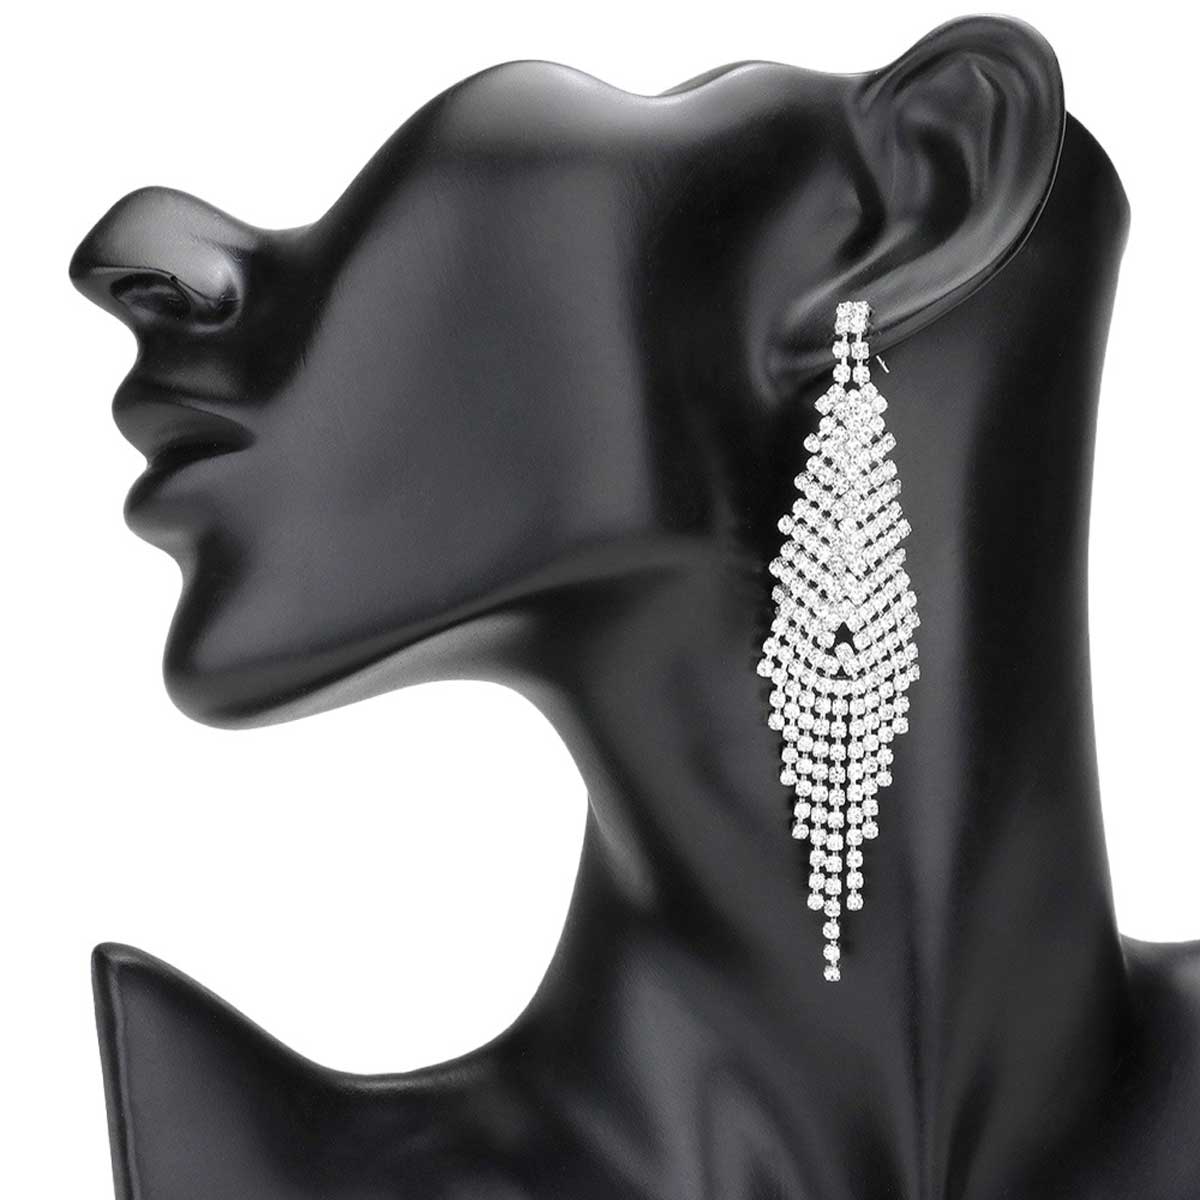 Gold Pave Crystal Rhinestone Fringe Evening Earrings, These gorgeous Crystal Rhinestone pieces will show your class on any special occasion. Eye-catching sparkle, the sophisticated look you have been craving for! This Earrings sparkles all around with its surrounding Crystal. This Earrings is easy to put on, and take off.